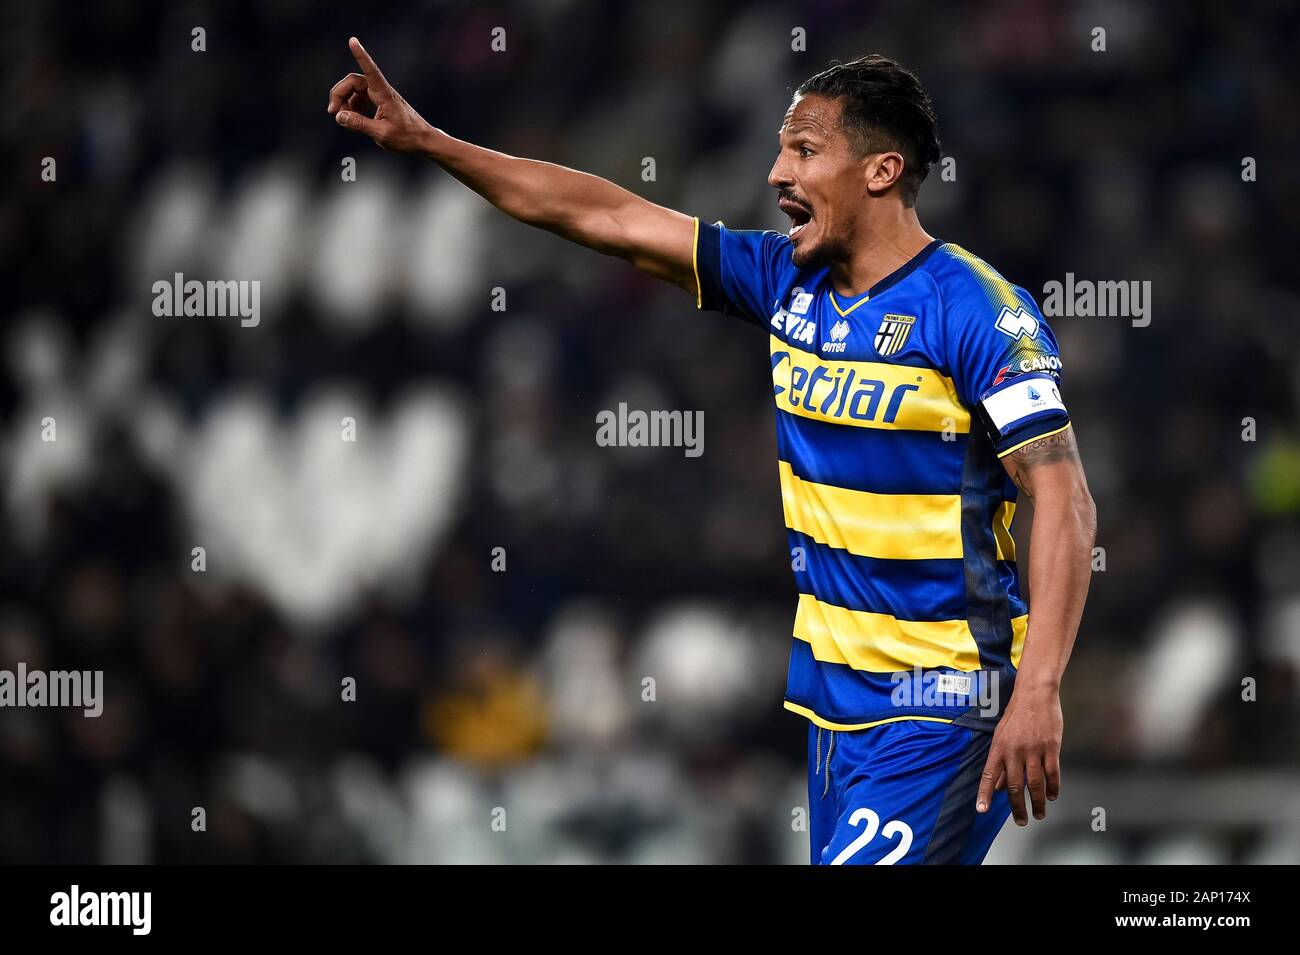 Turin, Italy - 19 January, 2020: Bruno Alves of Parma Calcio gestures during the Serie A football match between Juventus FC and Parma Calcio. Credit: Nicolò Campo/Alamy Live News Stock Photo